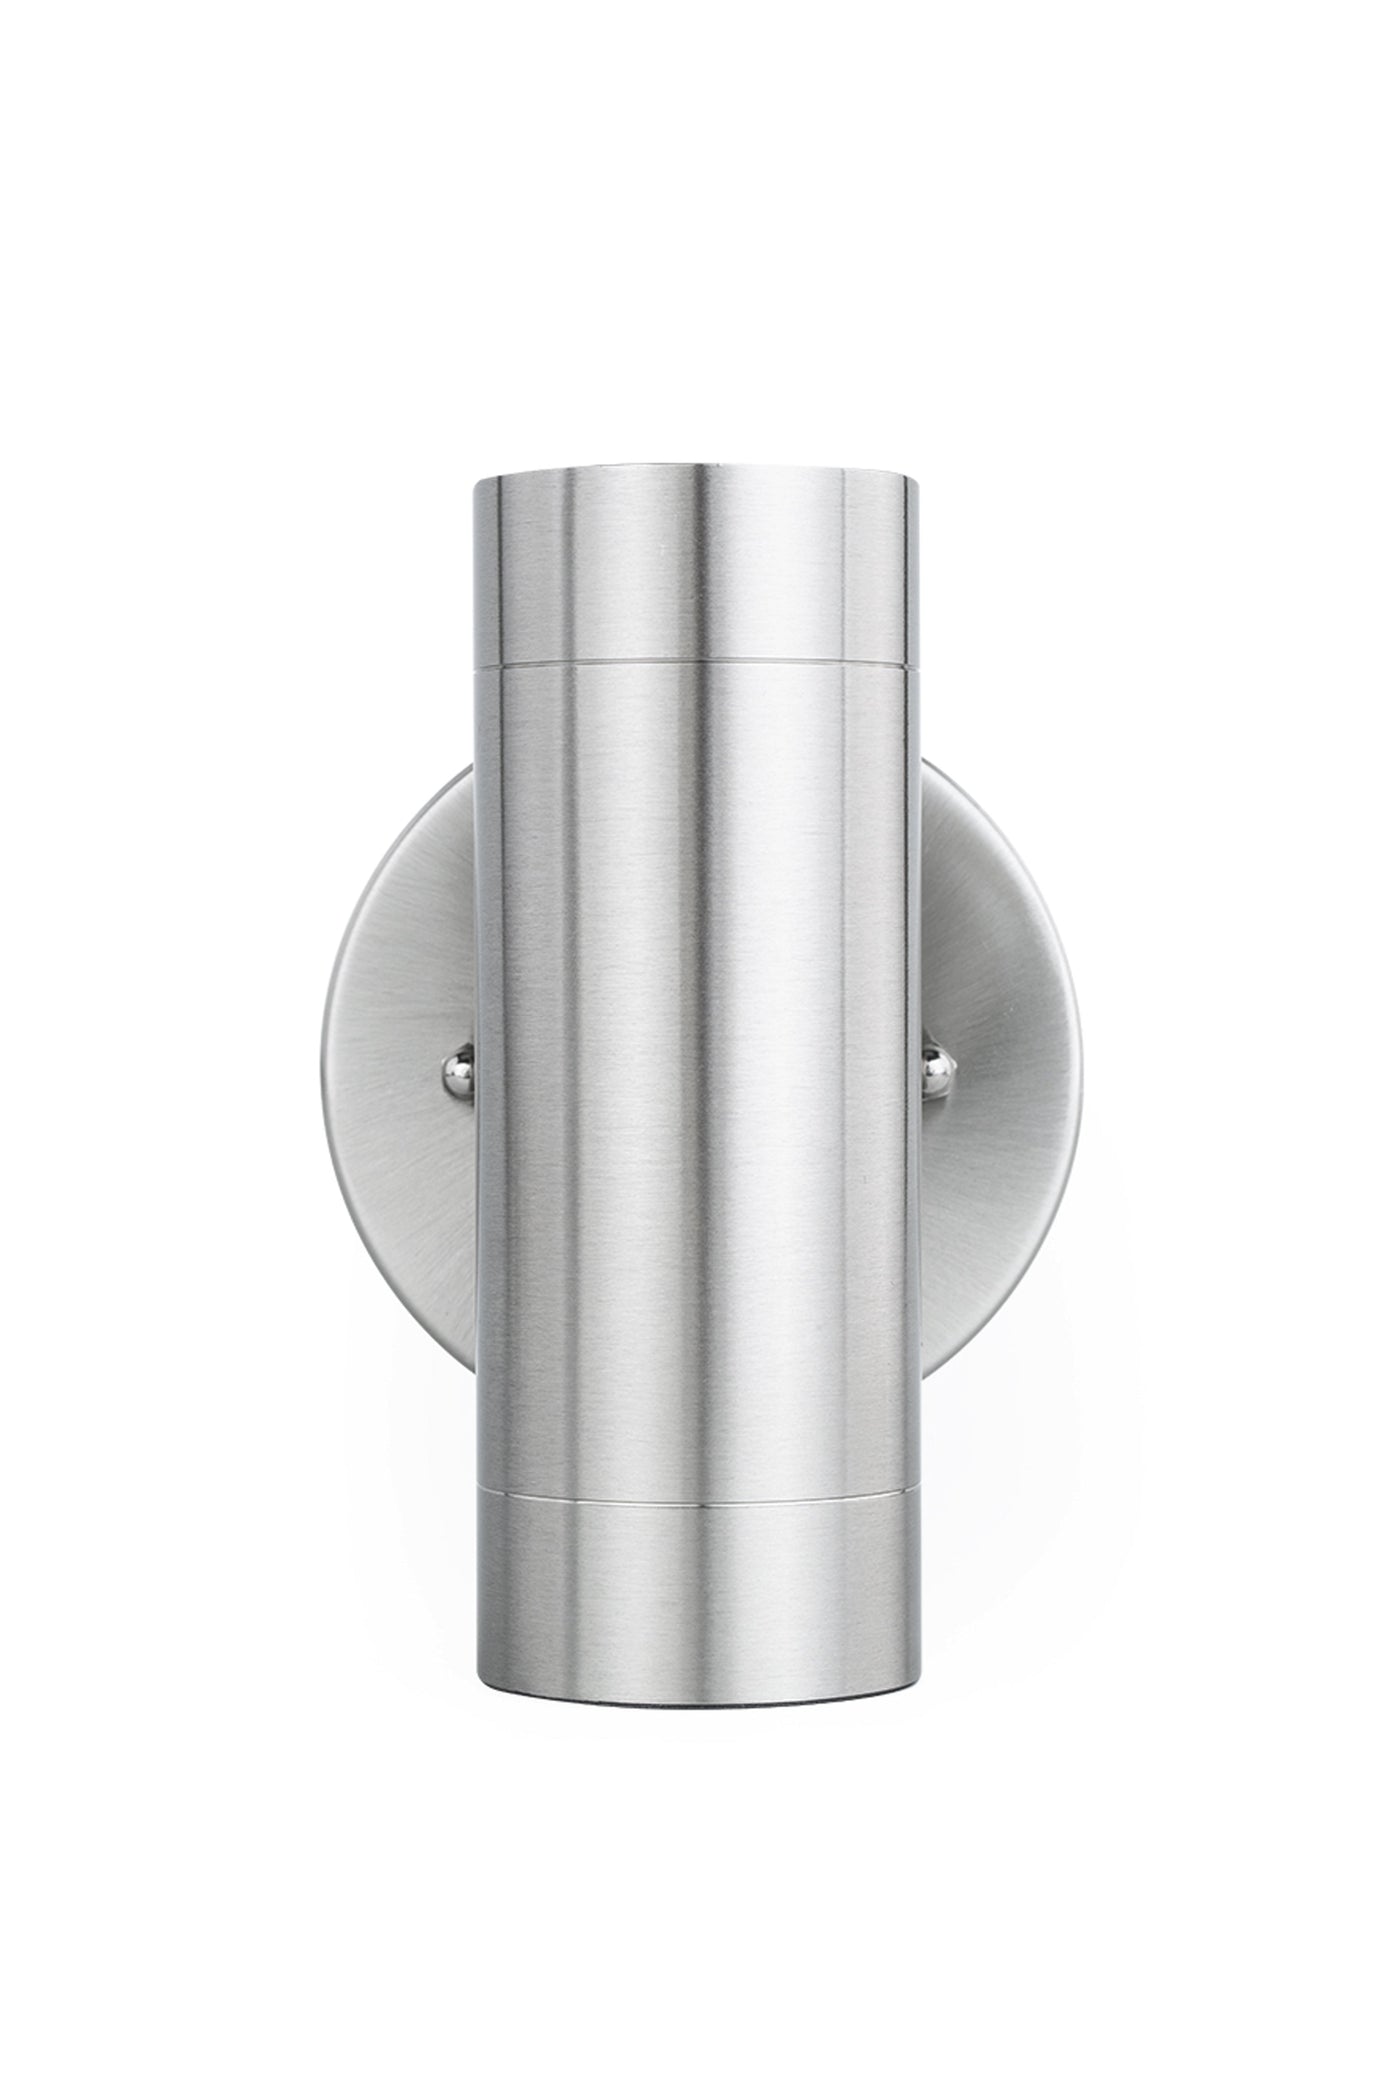 Bundle of LUTEC - 2-Light Brushed Stainless Steel Outdoor Integrated LED Wall Lantern Sconce, 3000K 11W 800LM, Silver Integrated Outdoor Wall Light,4 packs